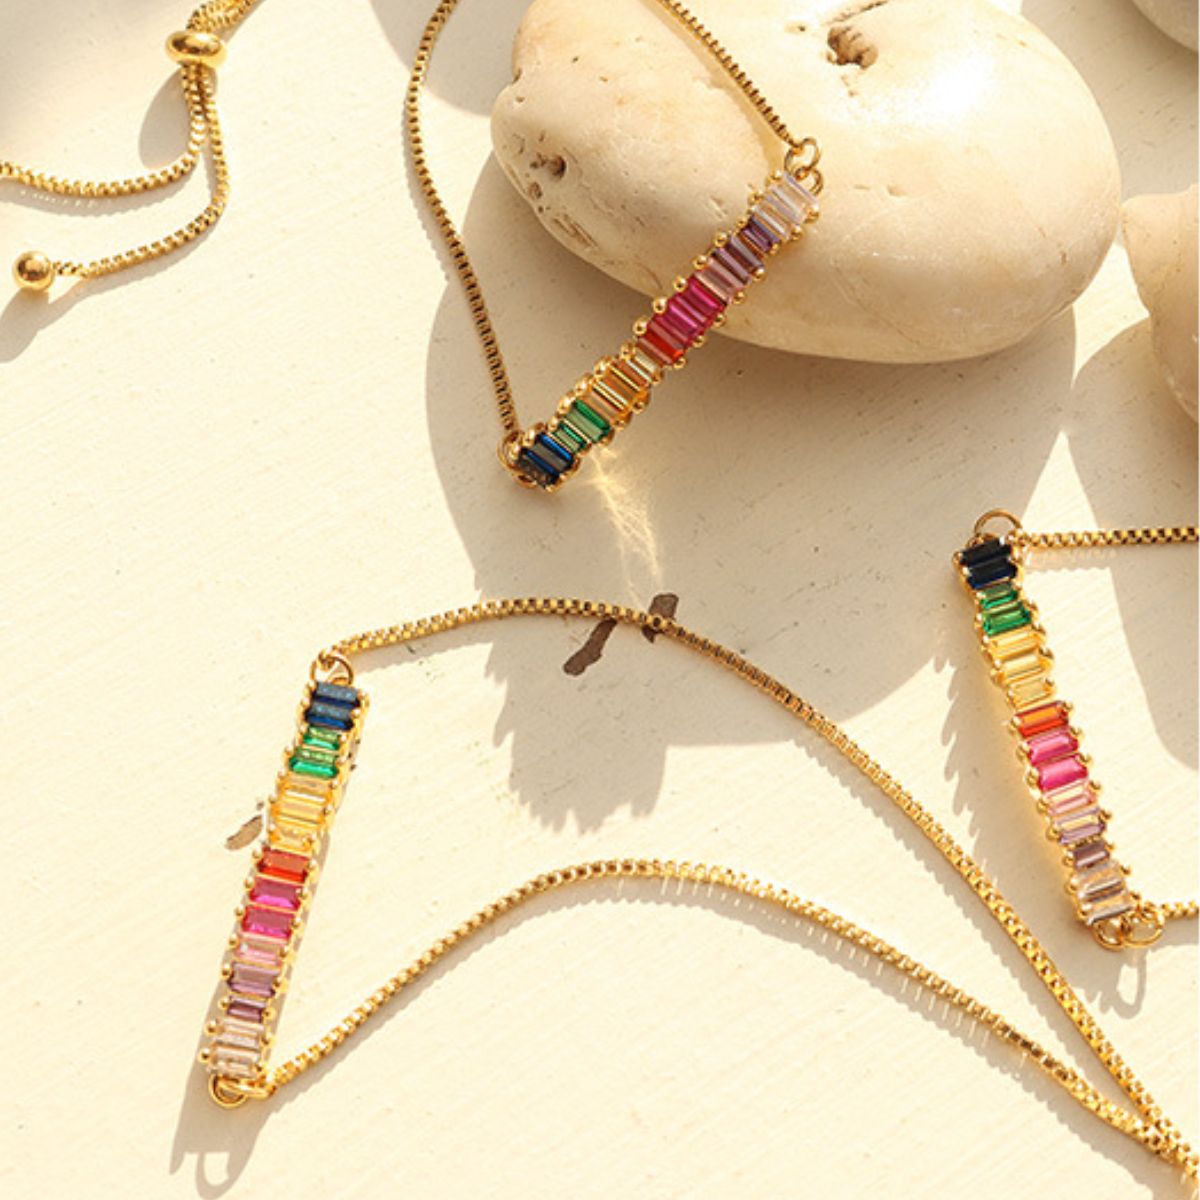 Gold chains adorned with rectangular, multicolored gemstone pendants are displayed against a light-colored background with smooth white stones. The pendants feature a mix of vibrant pink, green, blue, red, and clear gems, highlighting their intricate design alongside the Contrast Zircon Titanium Steel Bracelet from Marianela's Exclusive Shop, LLC.